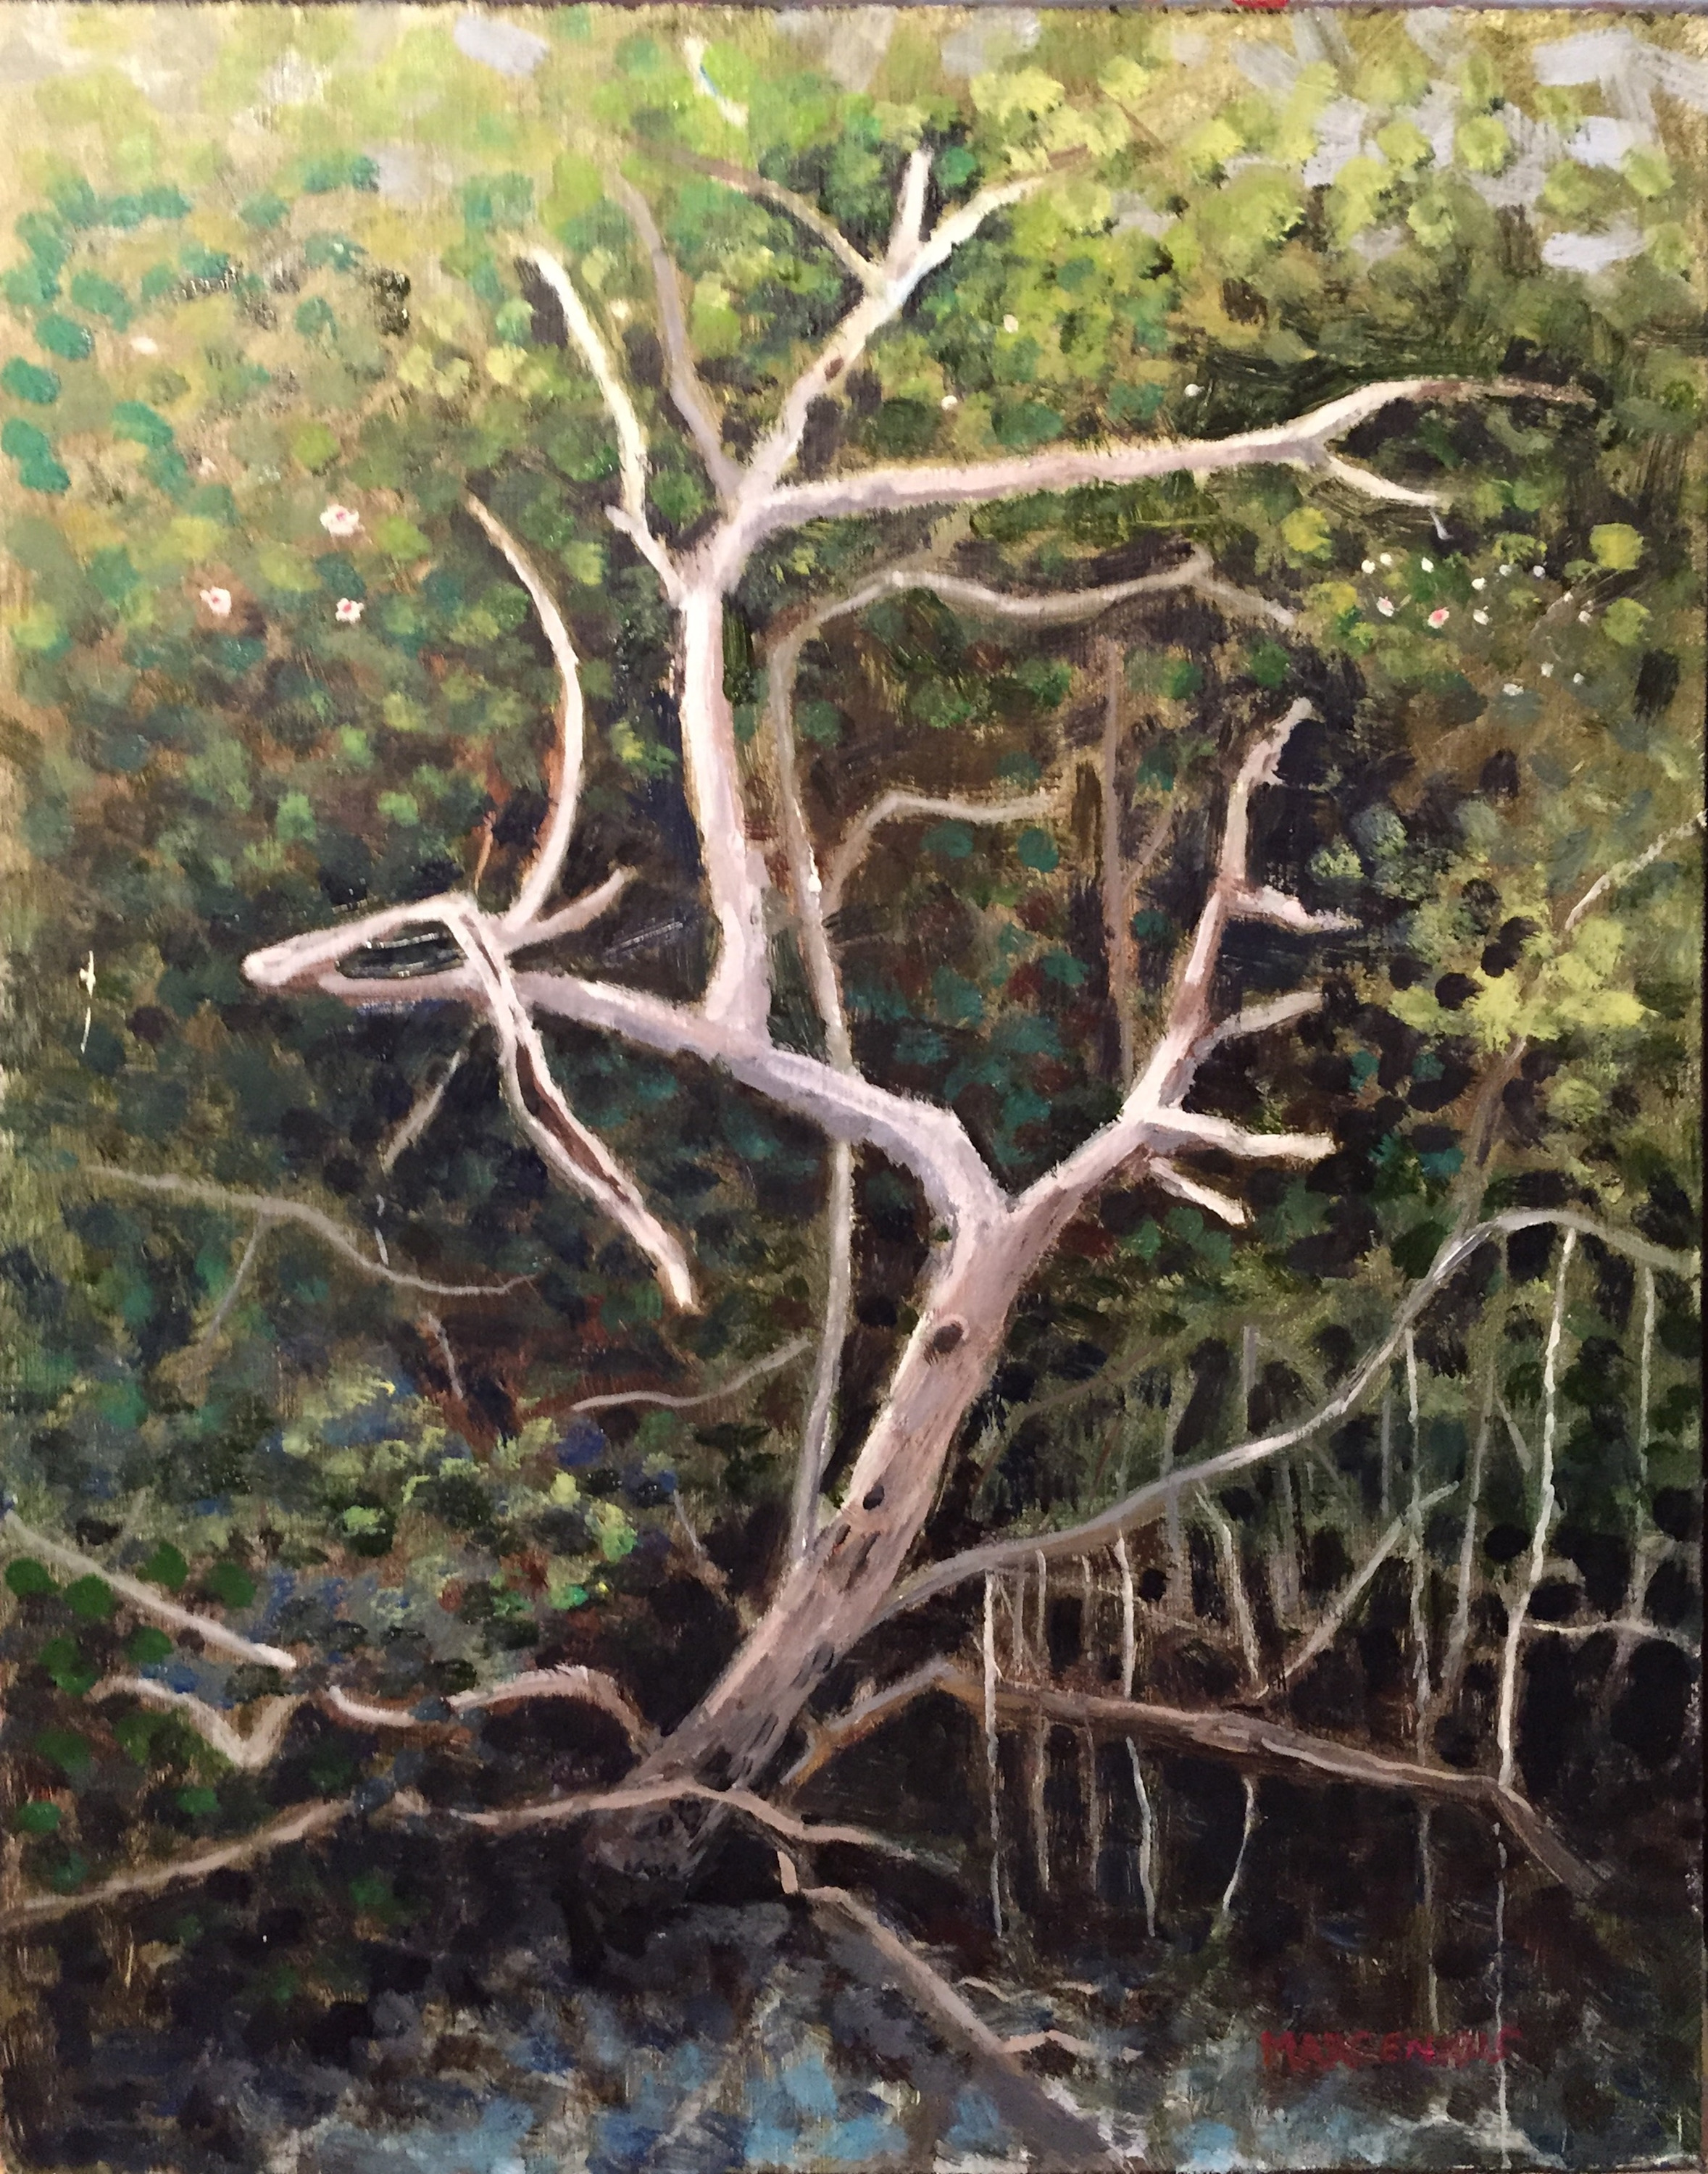 Ghost in the mangrove resized 11x14 resized kirgjq